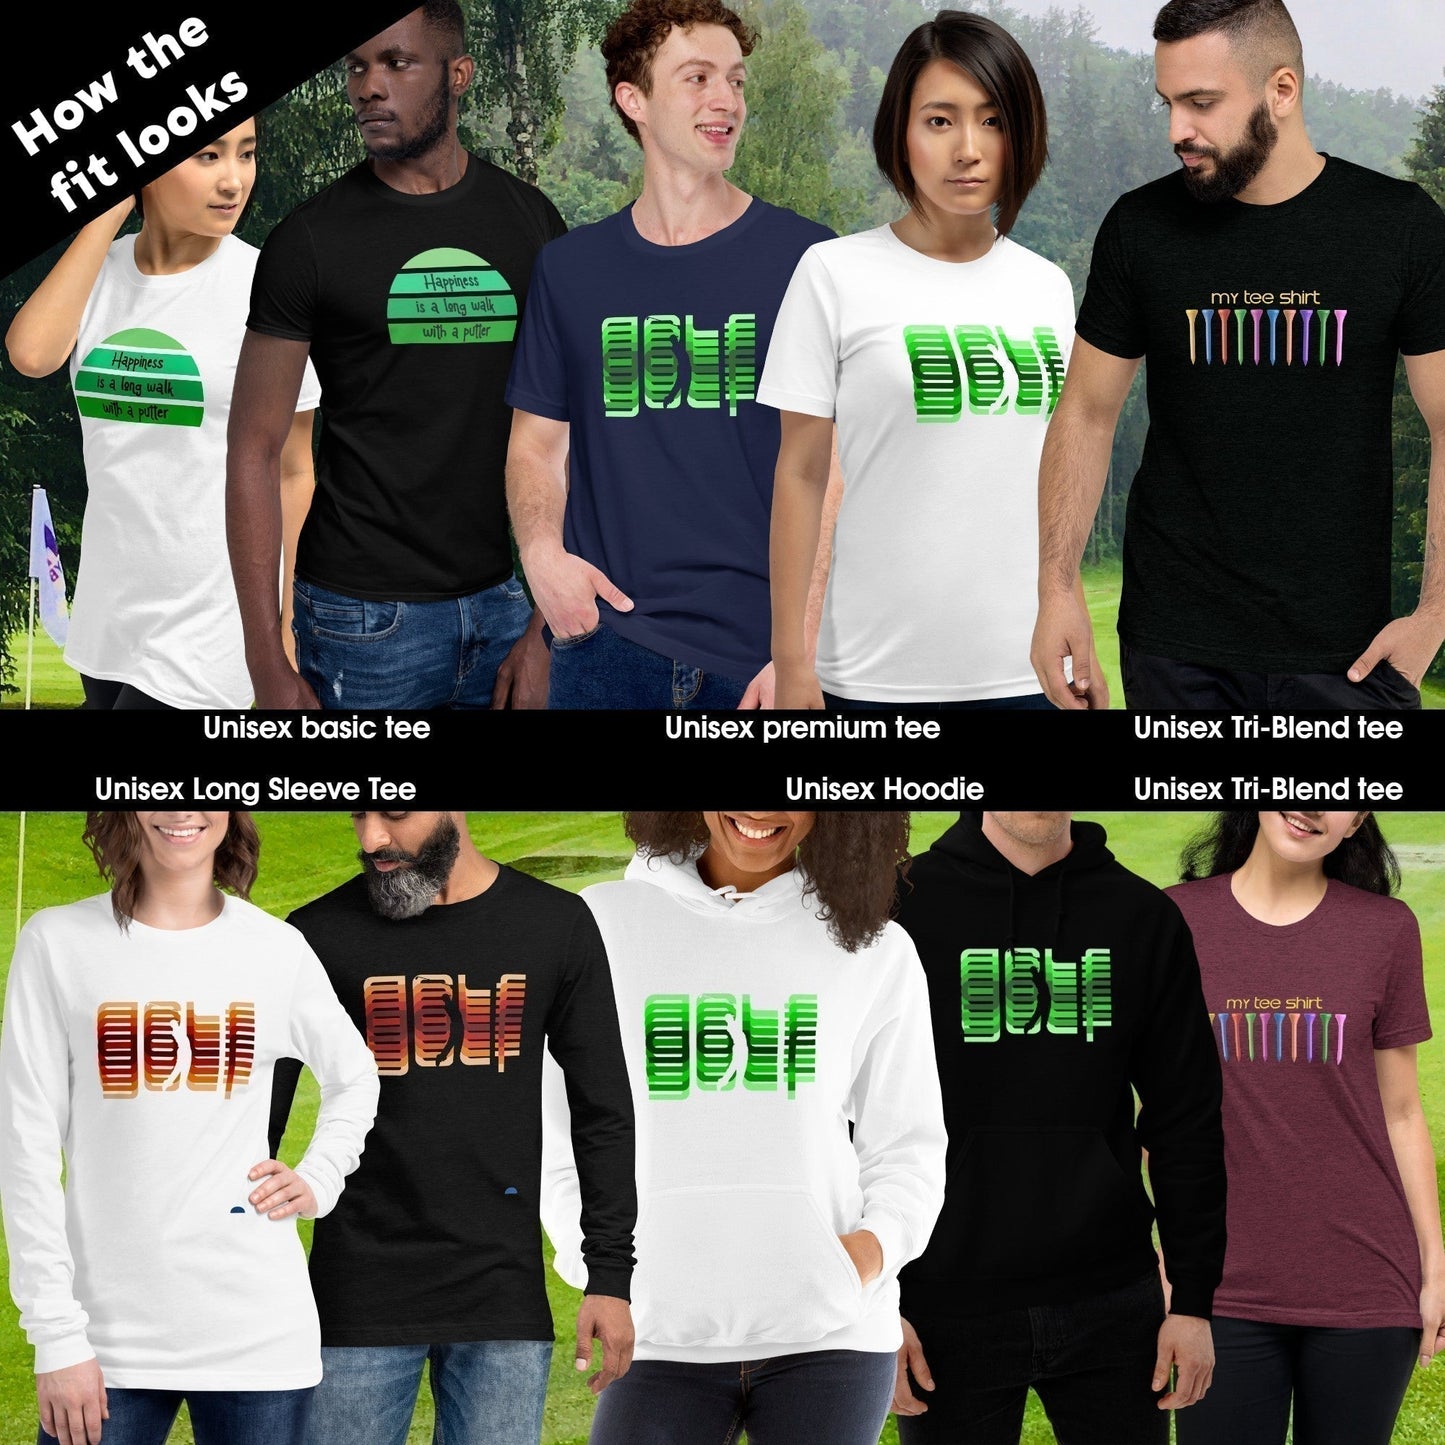 Birdie Golf TShirt and Hoodie is a Creative Golf Graphic design for Men and Women